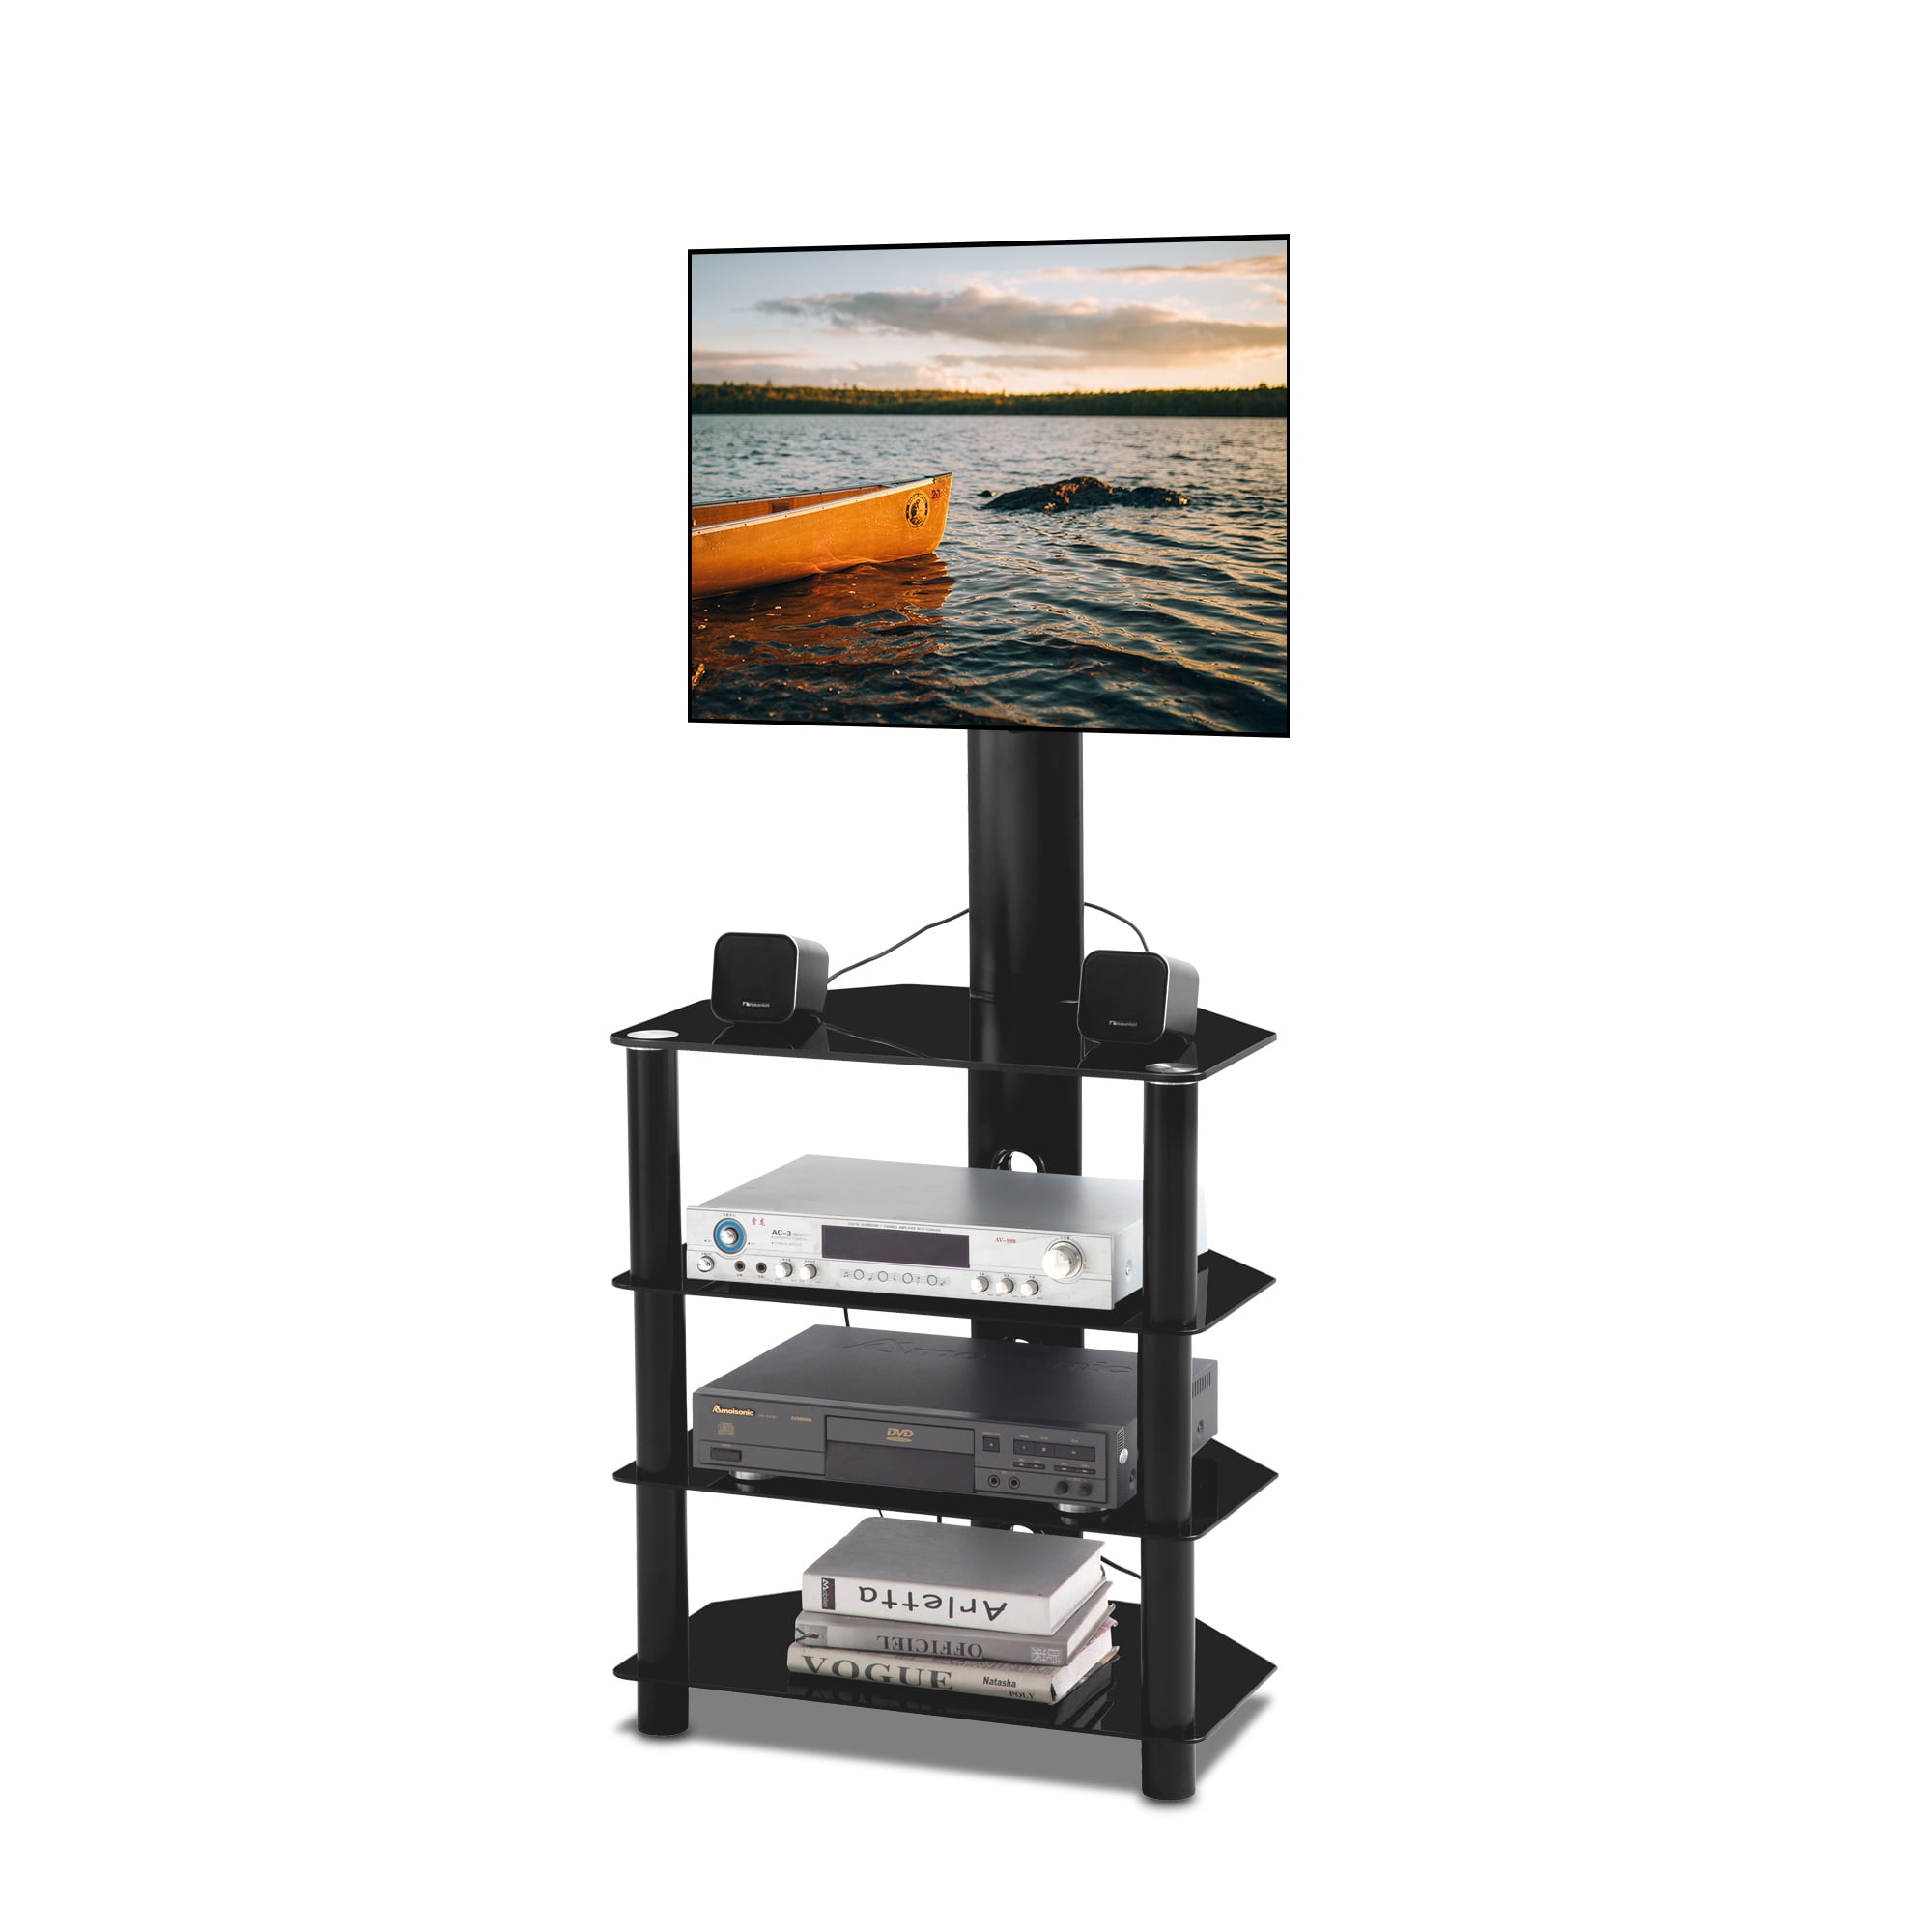 Swivel Corner TV Stand with Height Adjustable Mount for 32-55” Flat Screen TVs 